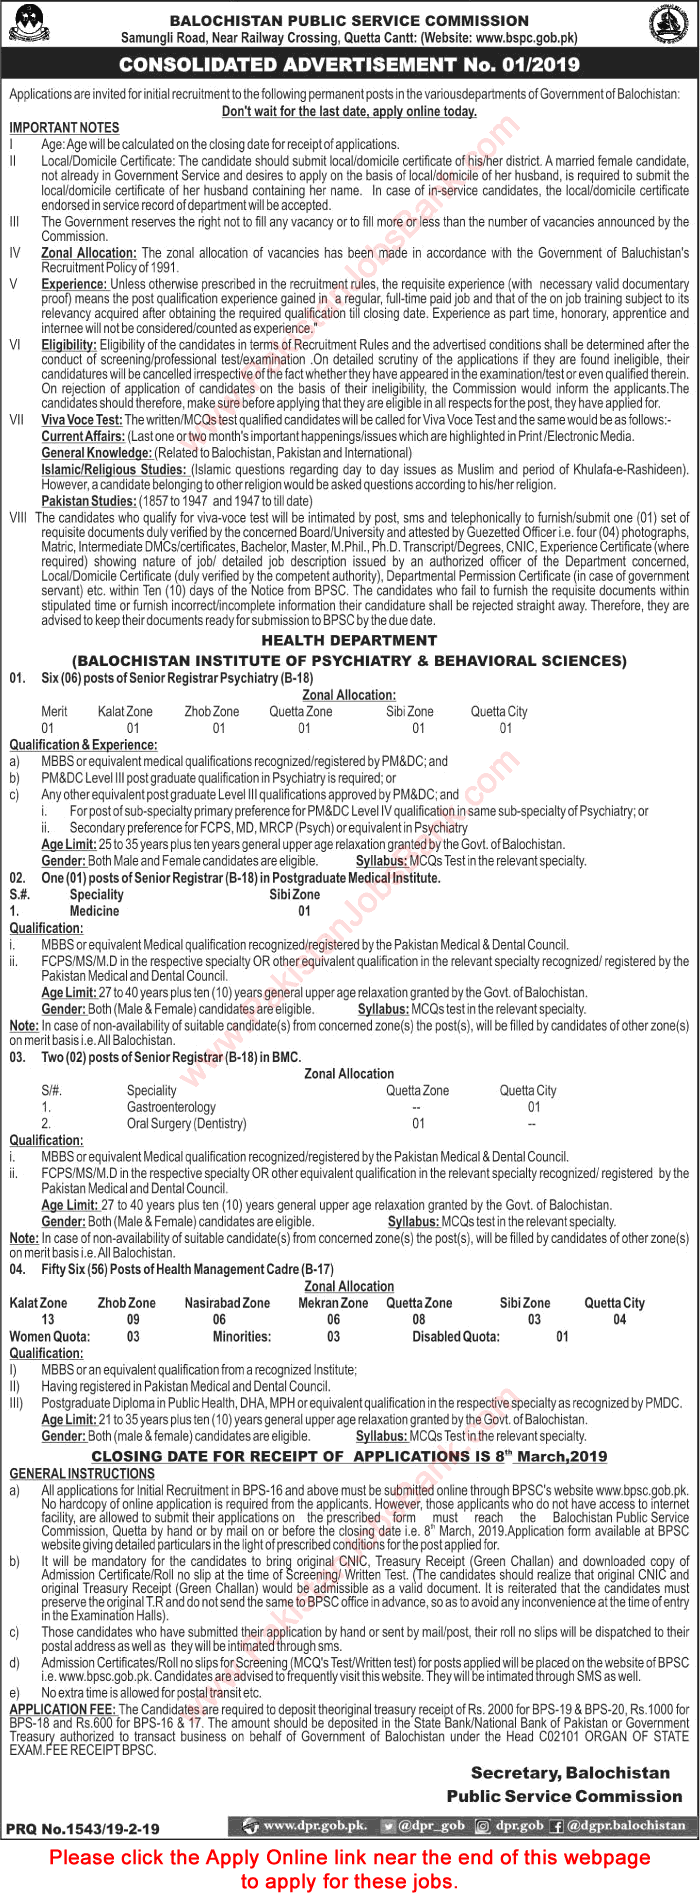 BPSC Jobs February 2019 Apply Online Consolidated Advertisement No 01/2019 1/2019 Latest